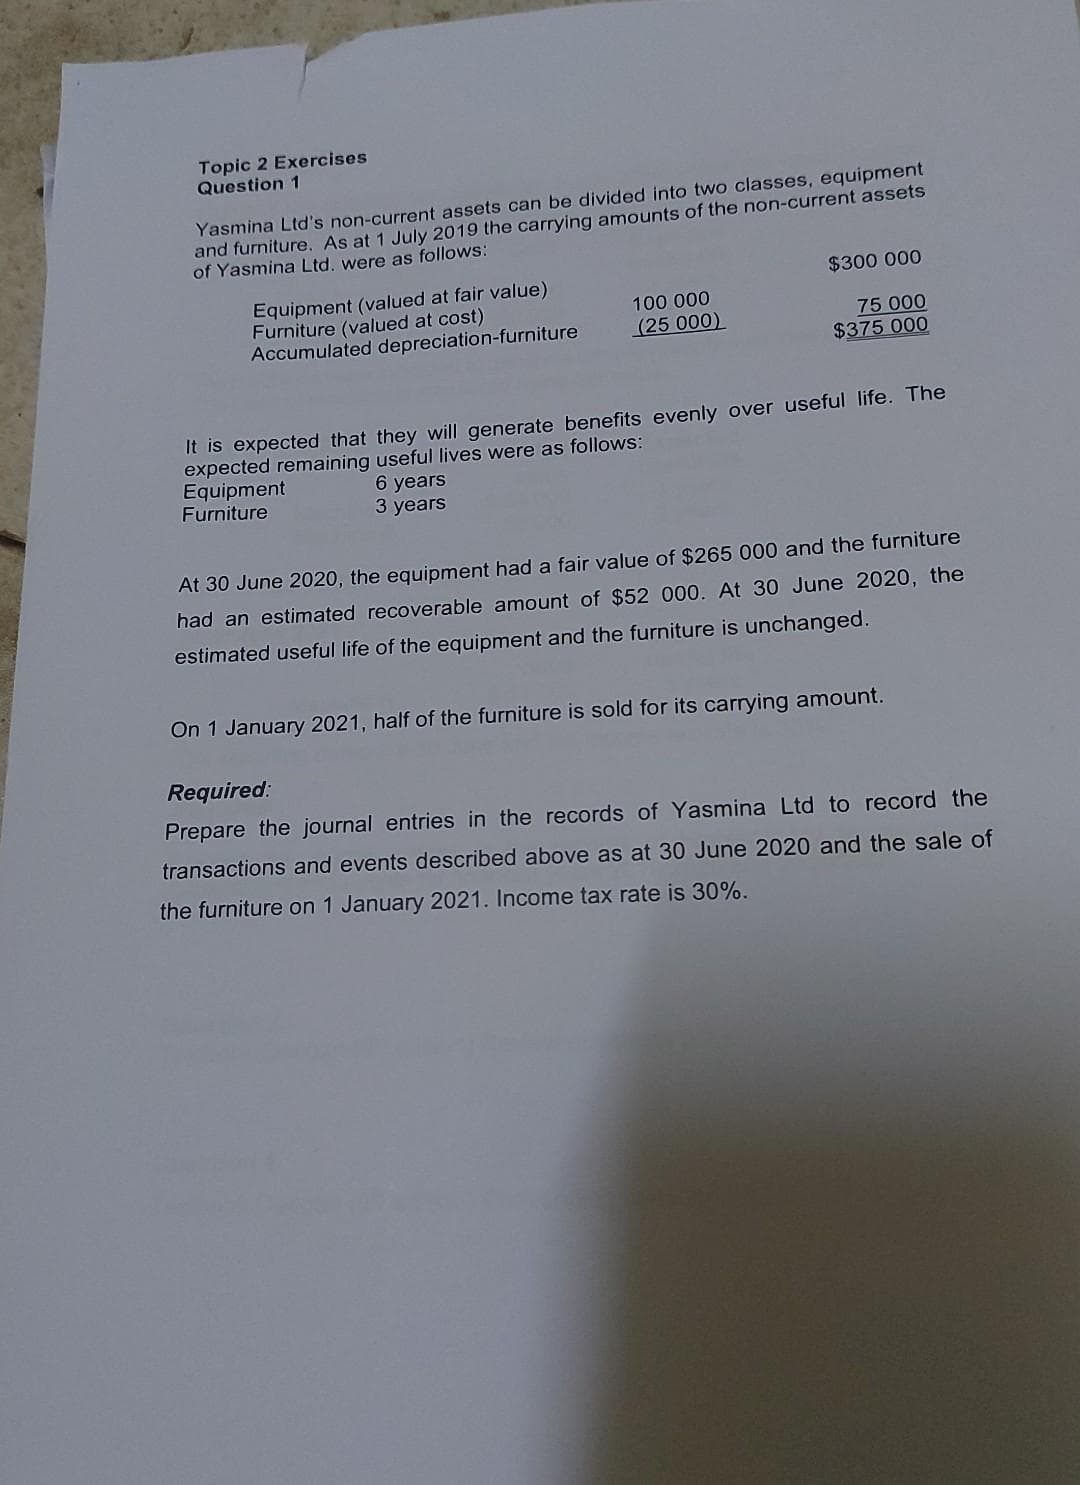 Topic 2 Exercises
Question 1
Yasmina Ltd's non-current assets can be divided into two classes, equipment
and furniture. As at 1 July 2019 the carrying amounts of the non-current assets
of Yasmina Ltd. were as follows:
Equipment (valued at fair value)
Furniture (valued at cost)
Accumulated depreciation-furniture
100 000
(25 000)
6 years
3 years
$300 000
75 000
$375 000
It is expected that they will generate benefits evenly over useful life. The
expected remaining useful lives were as follows:
Equipment
Furniture
At 30 June 2020, the equipment had a fair value of $265 000 and the furniture
had an estimated recoverable amount of $52 000. At 30 June 2020, the
estimated useful life of the equipment and the furniture is unchanged.
On 1 January 2021, half of the furniture is sold for its carrying amount.
Required:
Prepare the journal entries in the records of Yasmina Ltd to record the
transactions and events described above as at 30 June 2020 and the sale of
the furniture on 1 January 2021. Income tax rate is 30%.